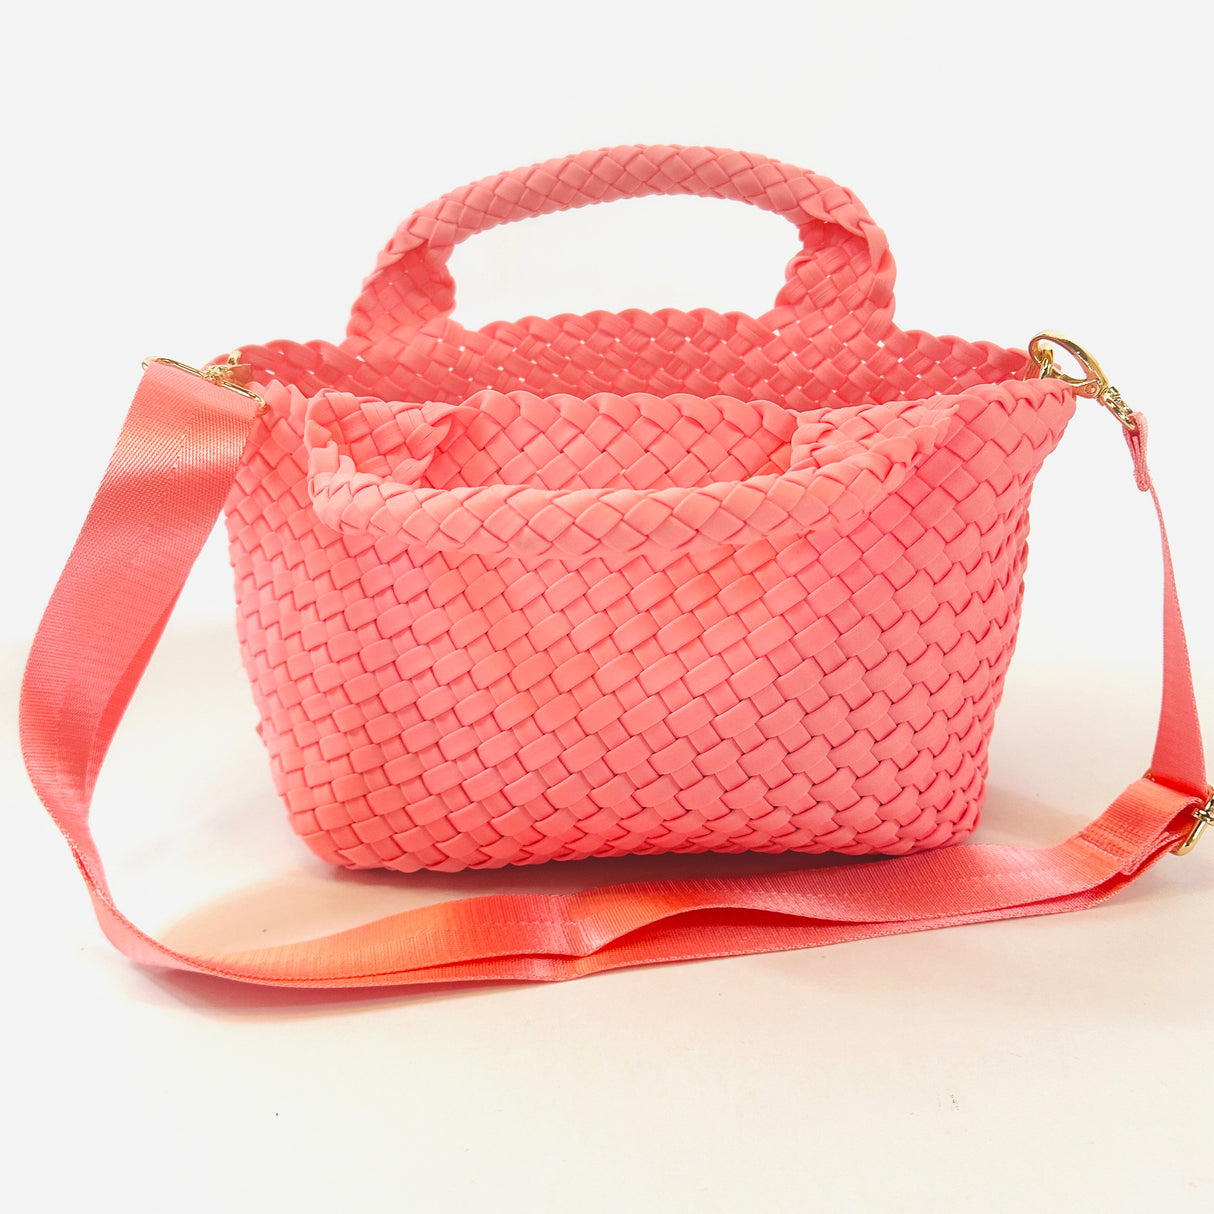 Woven Neoprene Pink Tote With Matching Solid Crossbody Strap